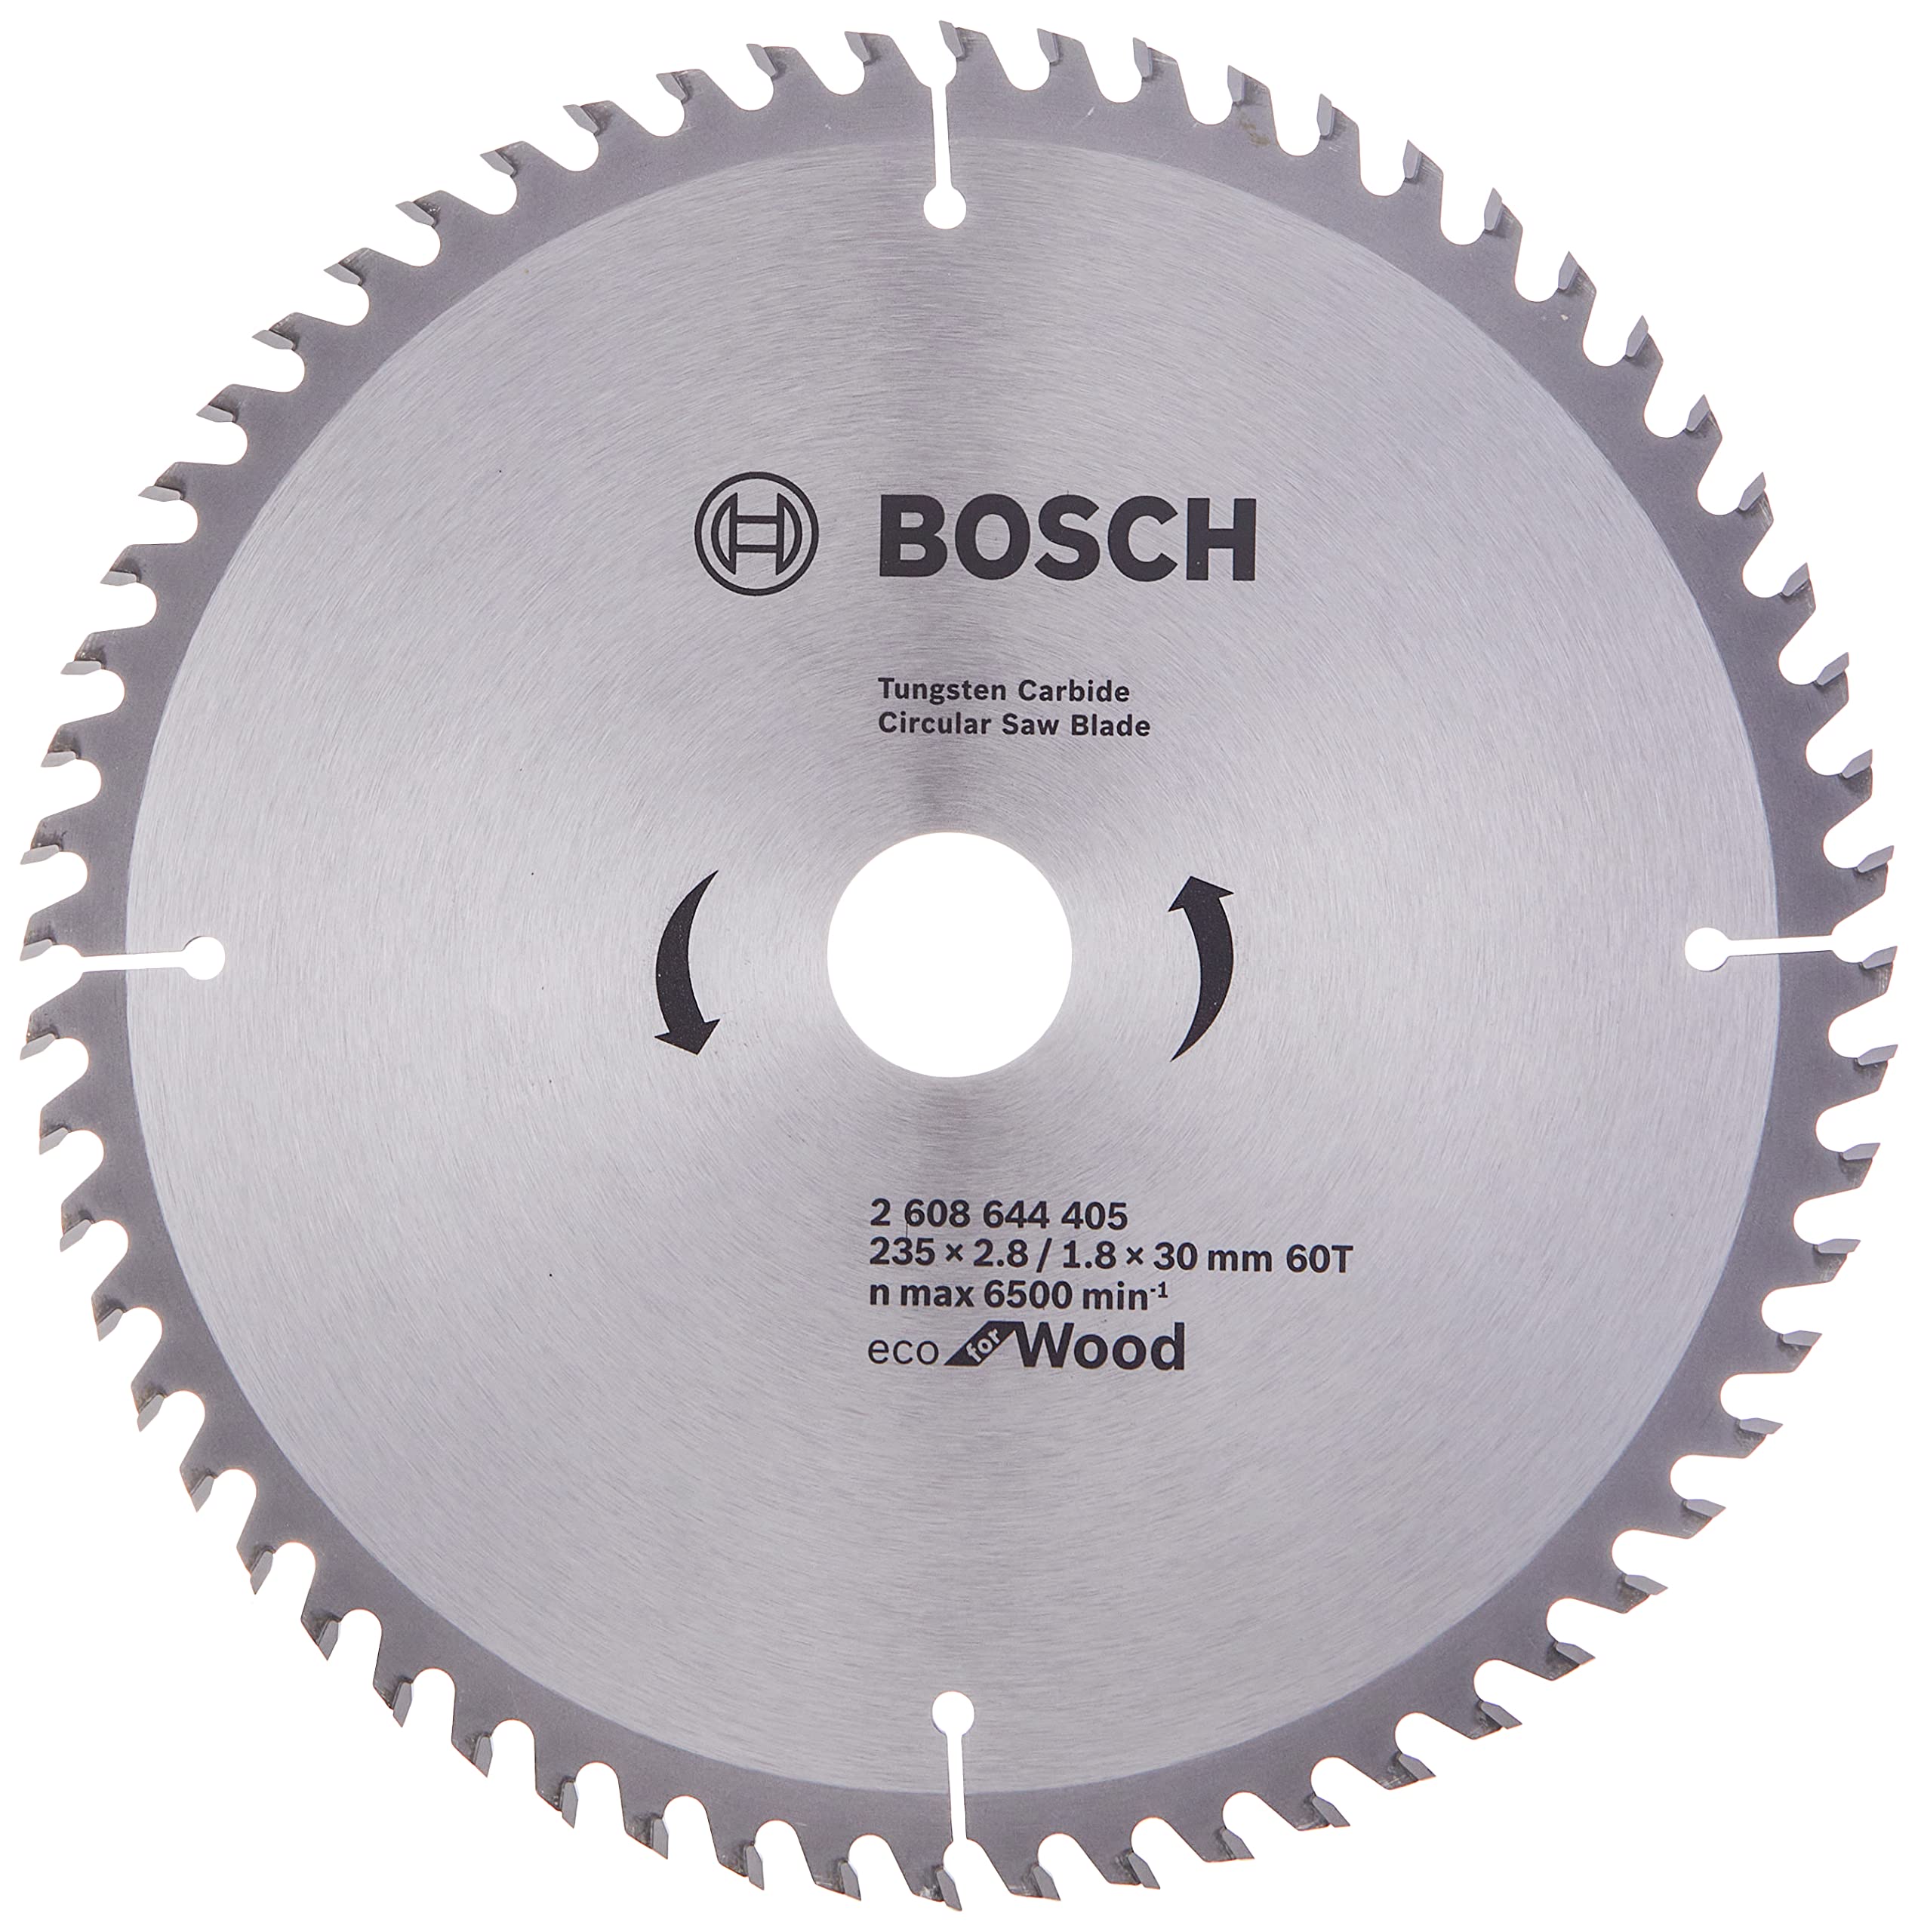 Bosch Circular Saw Blade Eco for wood 235mm 60T 2608644405 Power Tool Services